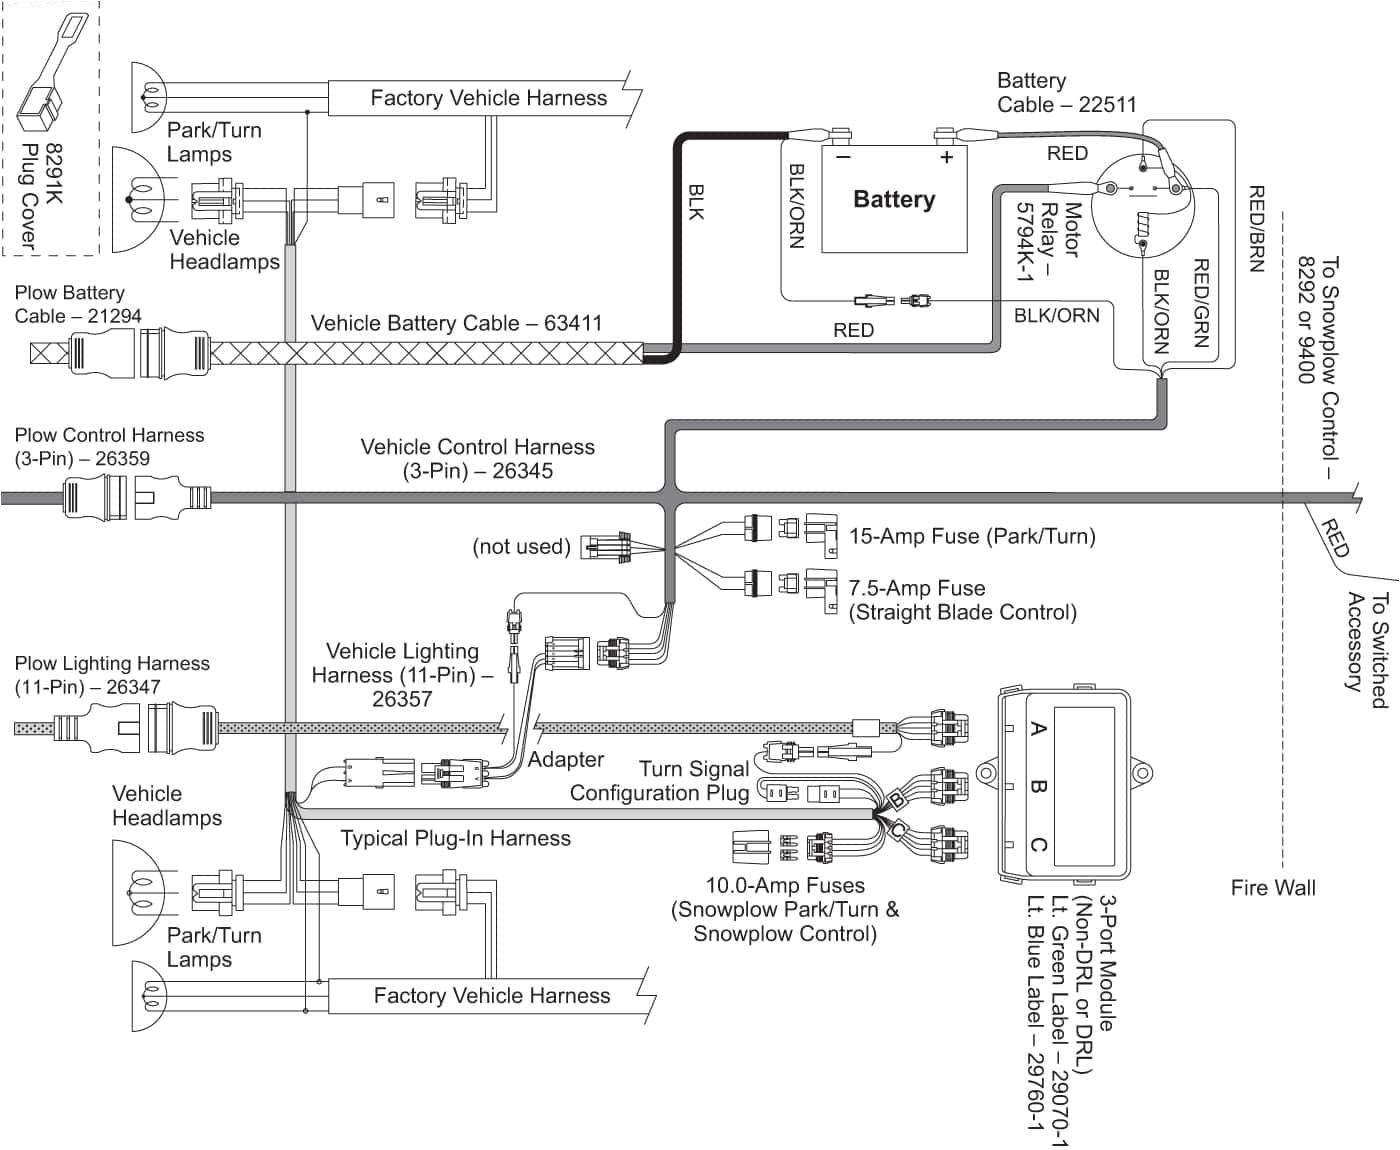 hb5 wiring diagram wiring diagram repair guides fisher unimount 0206 dodge hb5 12 pin control wiring harness 63427